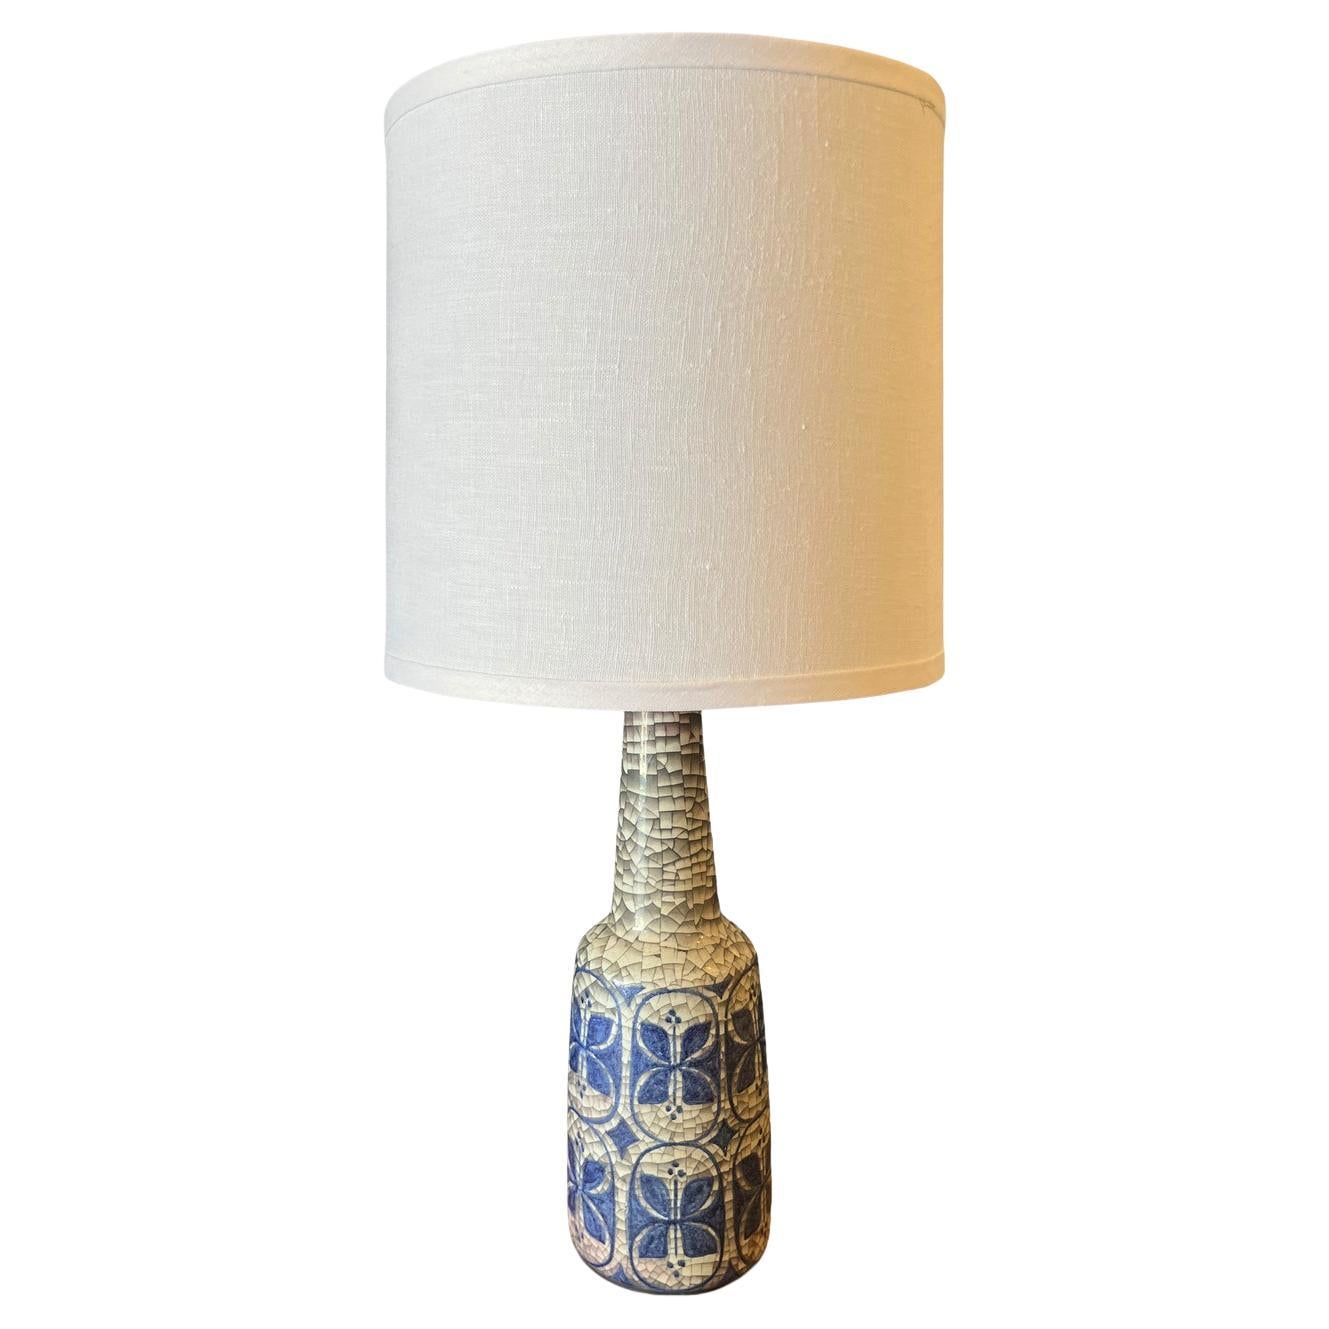 Hand Thrown Ceramic Midcentury Danish Lamp in Blue and White, Maker's Mark Ma&S For Sale